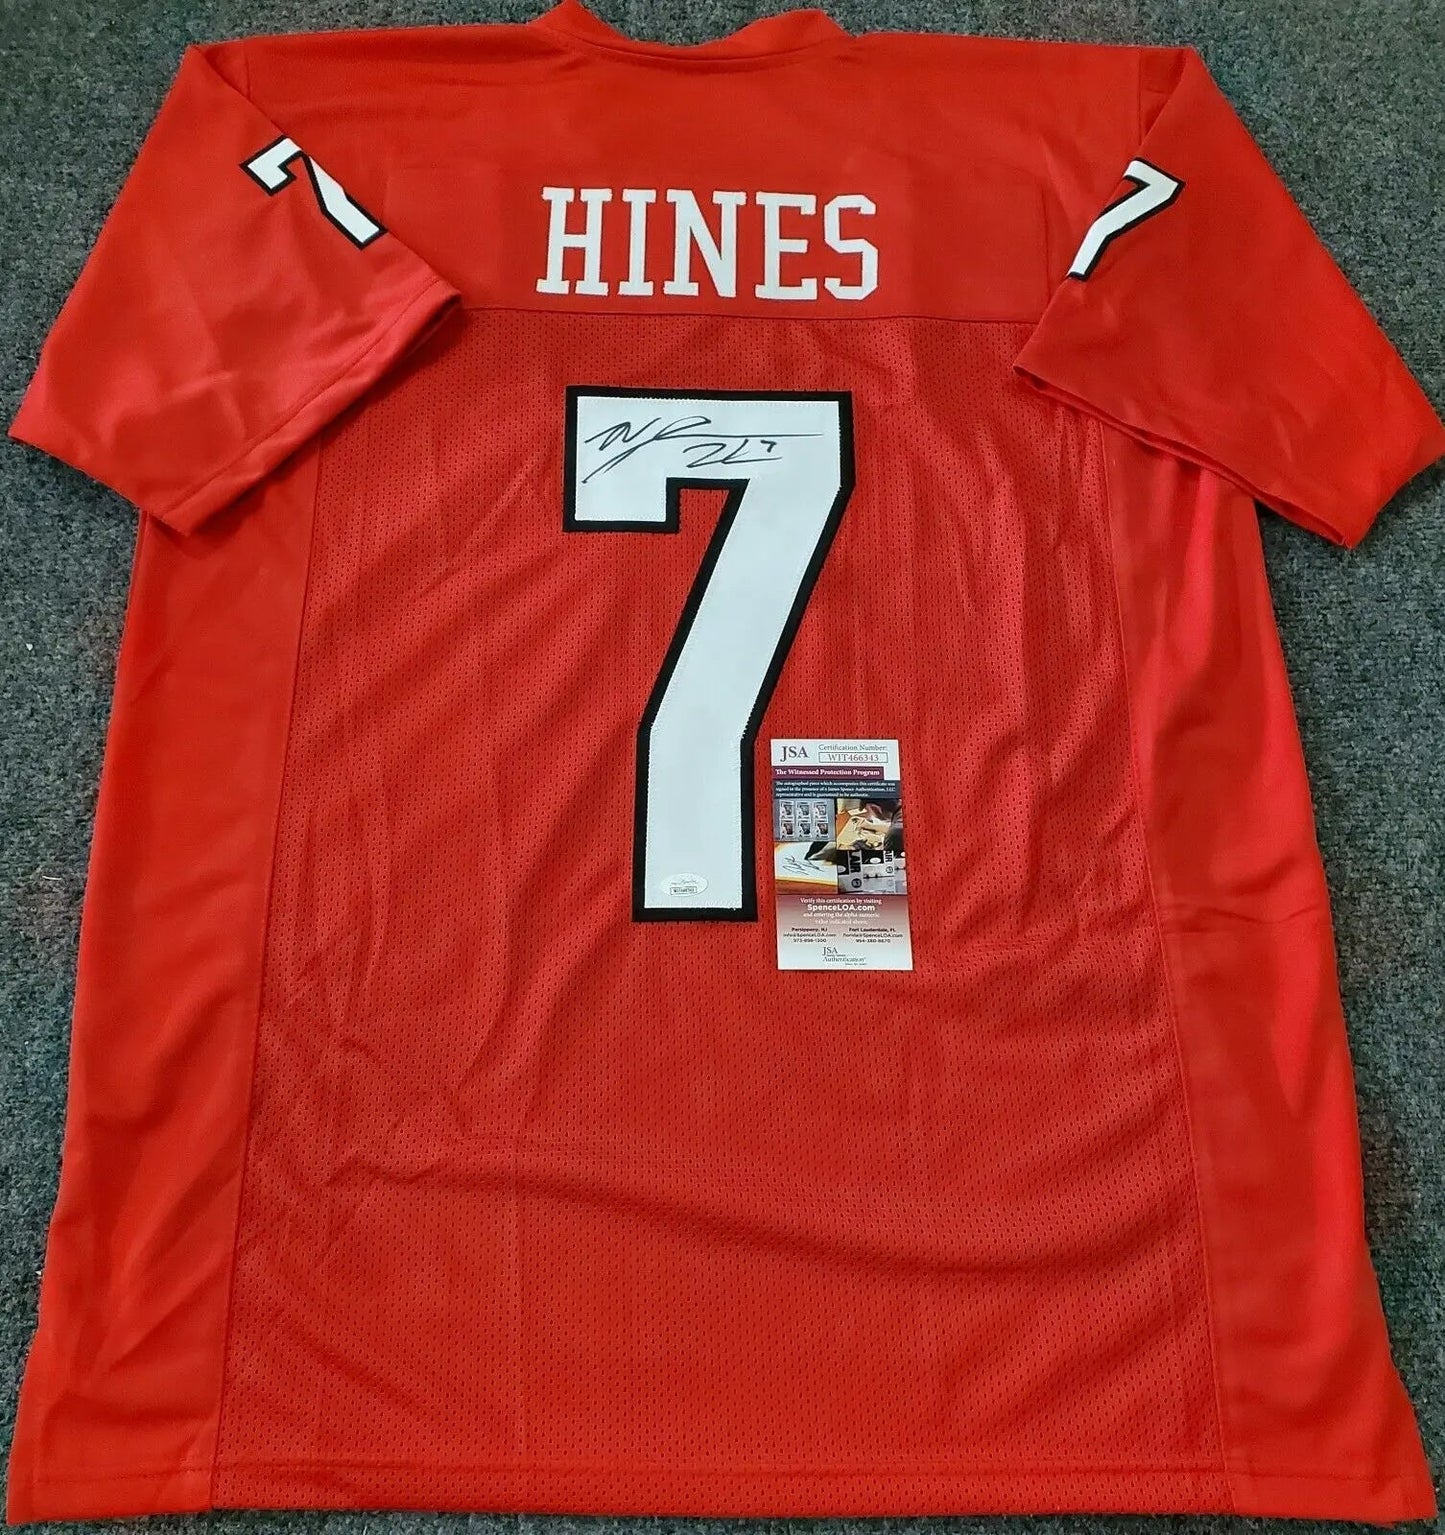 MVP Authentics Nc State Nyheim Hines Autographed Signed Jersey Jsa Coa 135 sports jersey framing , jersey framing